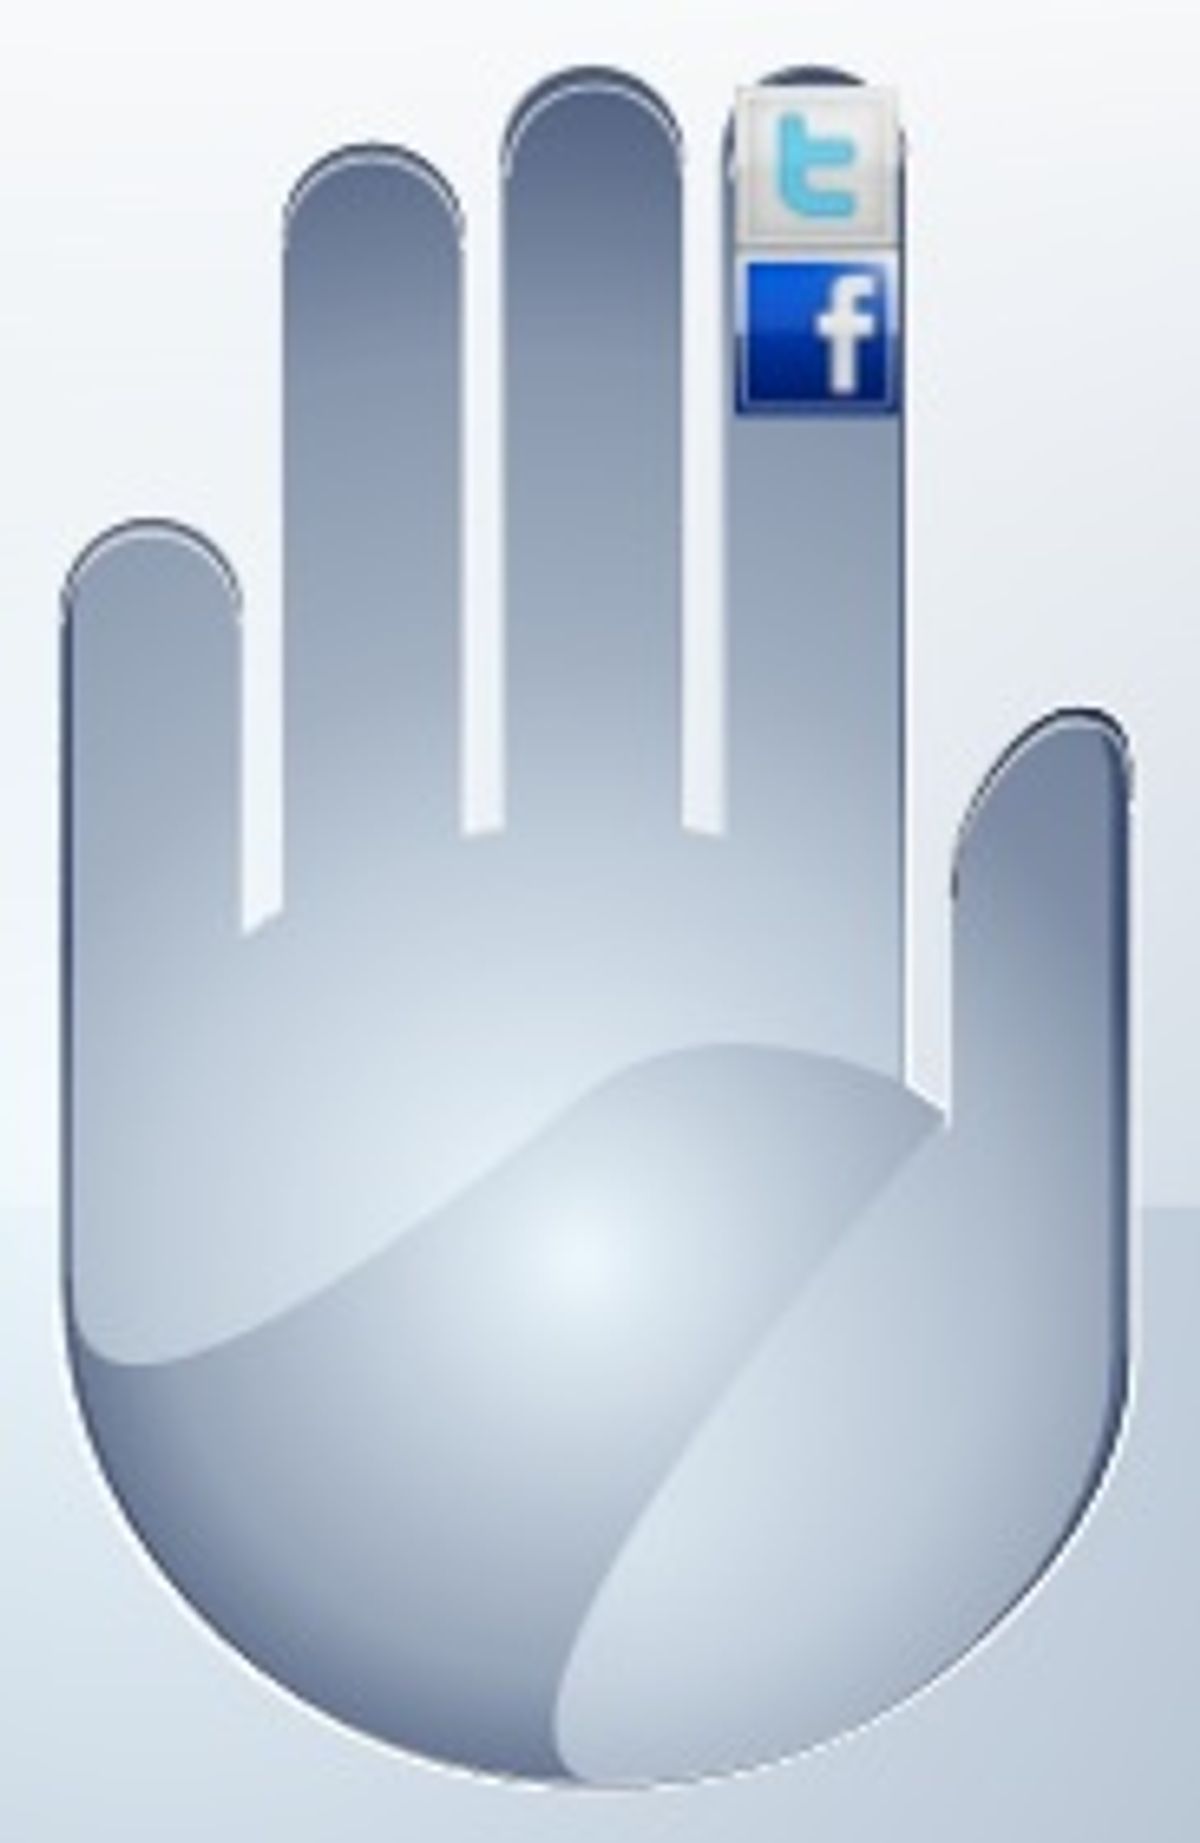 Give Social Networking the Finger